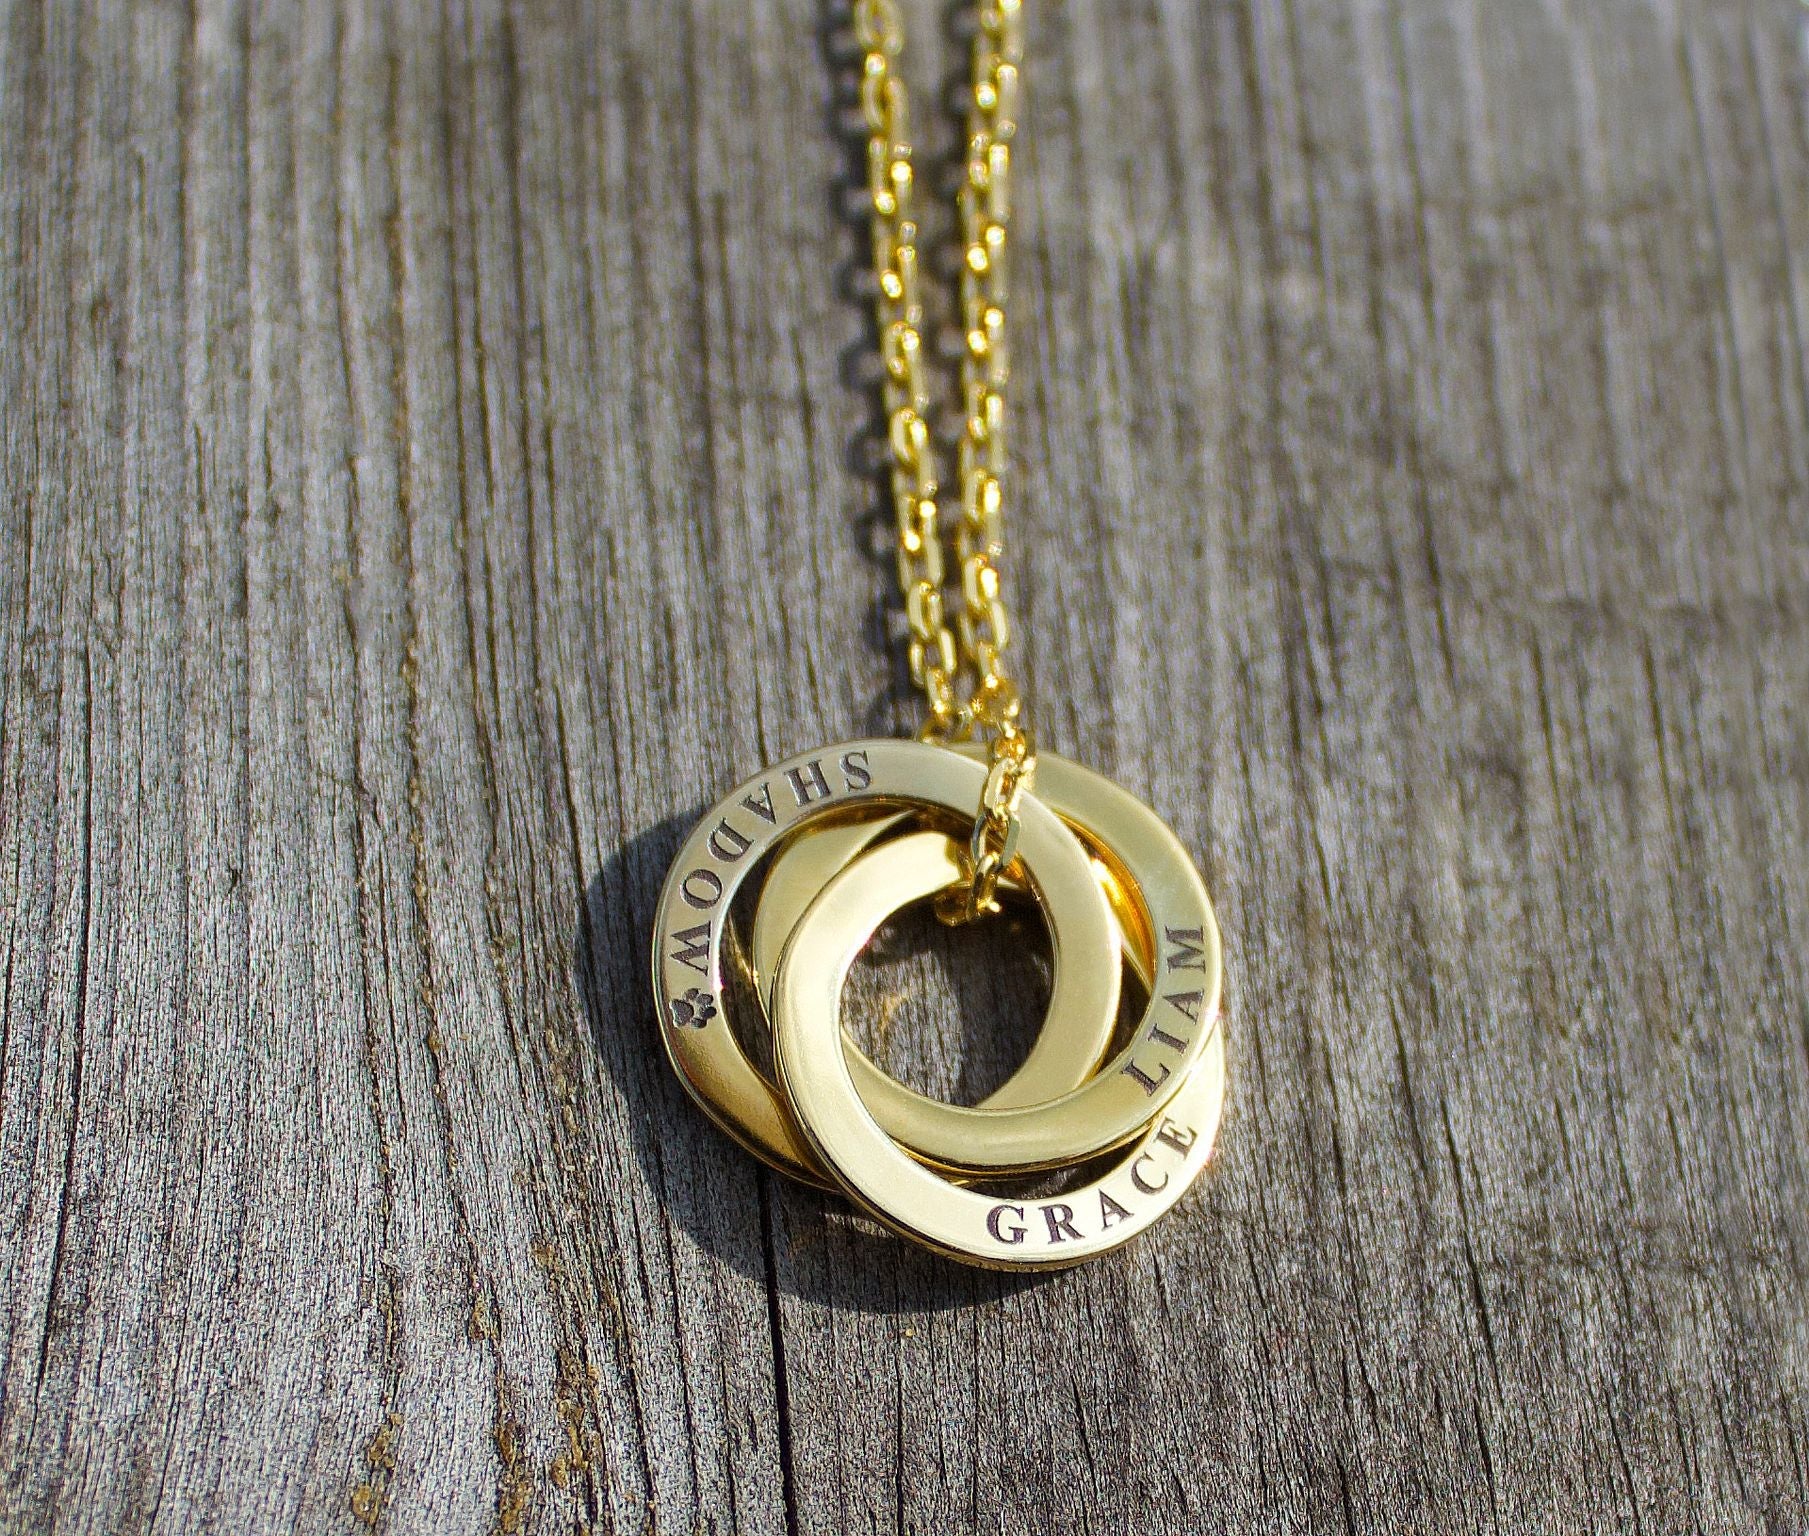 Mother's Day Gold Personalised Ring Necklace - MYLEE London